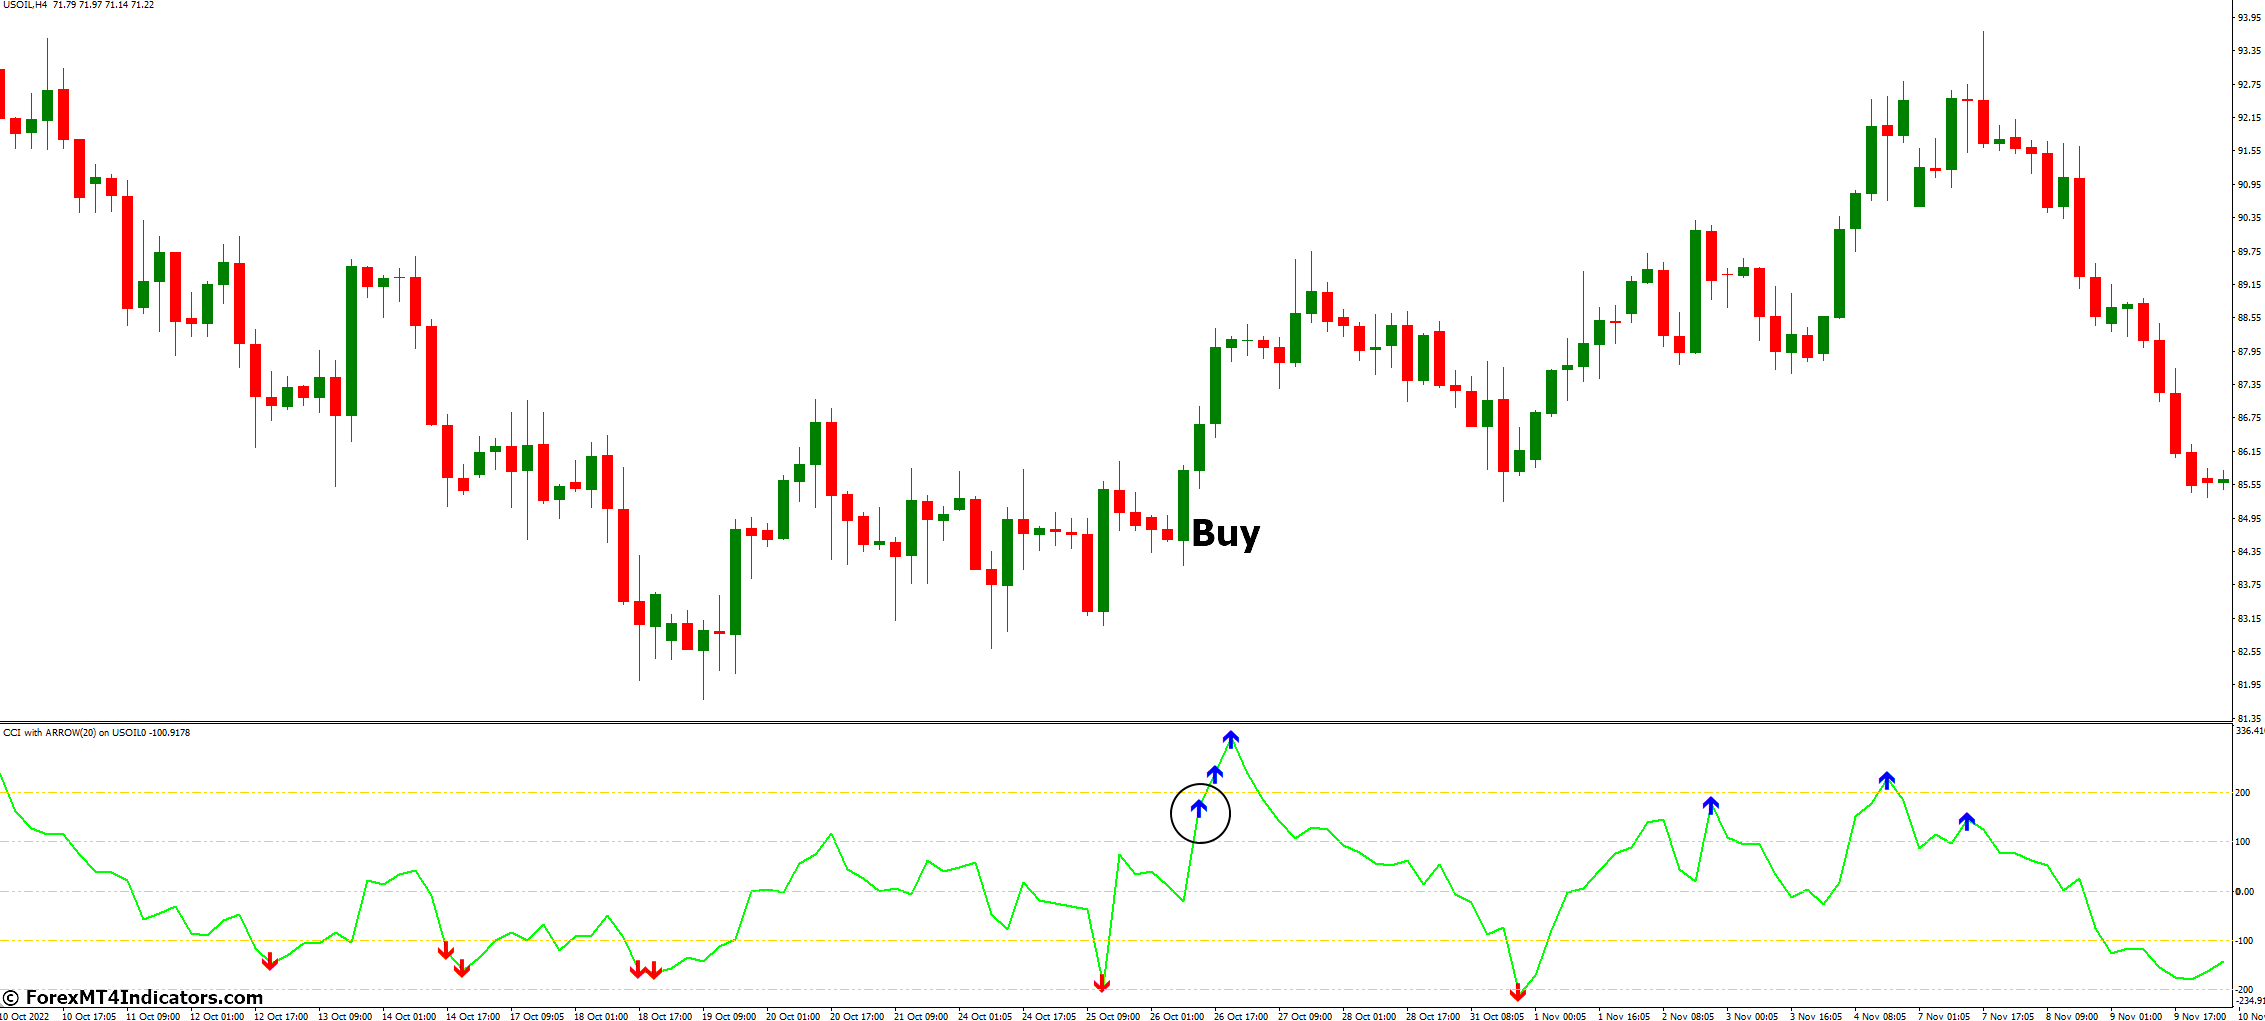 How to Trade with CCI With Arrow Indicator MetaTrader 4 - Buy Entry